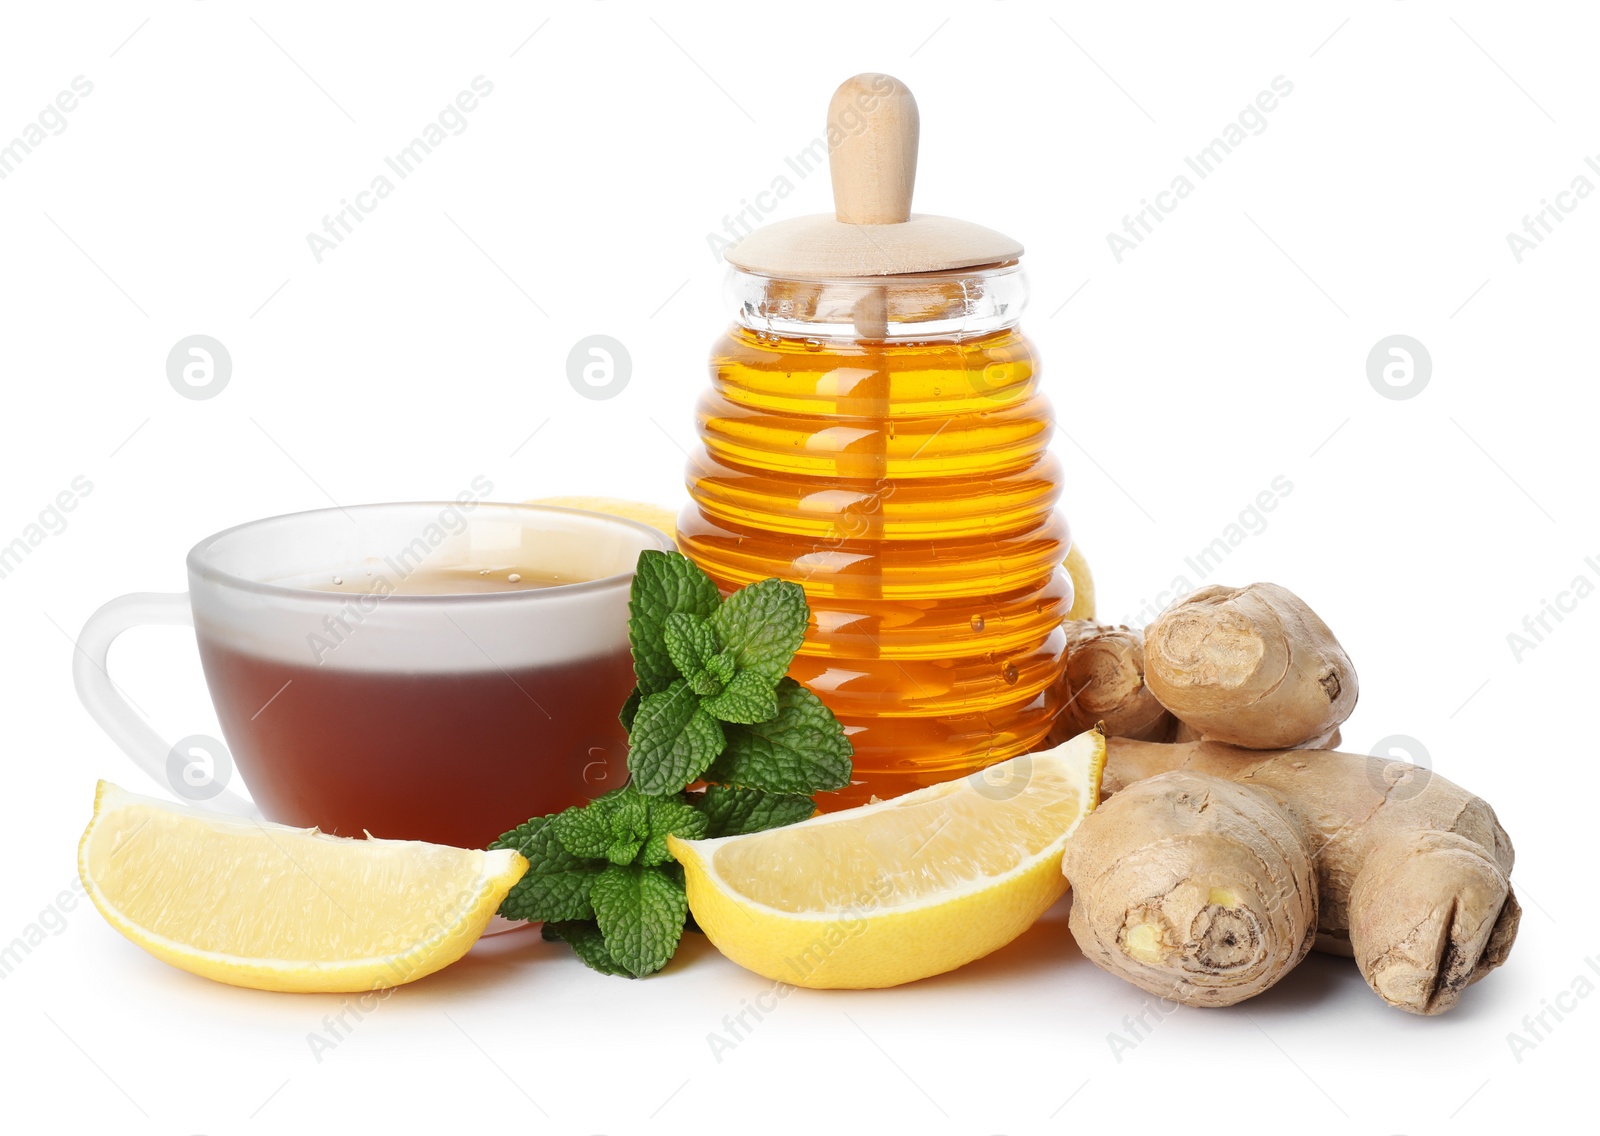 Photo of Jar with honey, cup of tea, ginger, mint and lemon on white background. Cough remedies